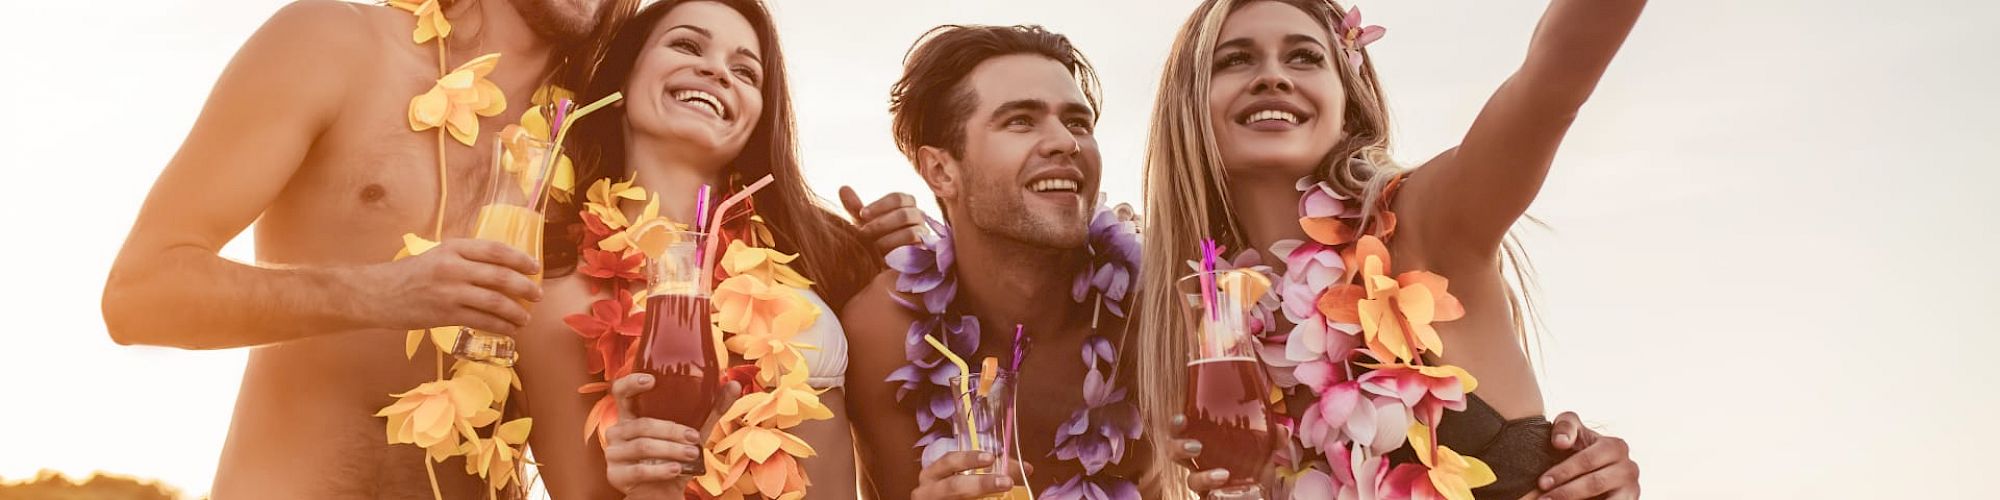 A group of four people, dressed in tropical attire with leis, are taking a selfie on a beach at sunset, holding drinks and smiling.